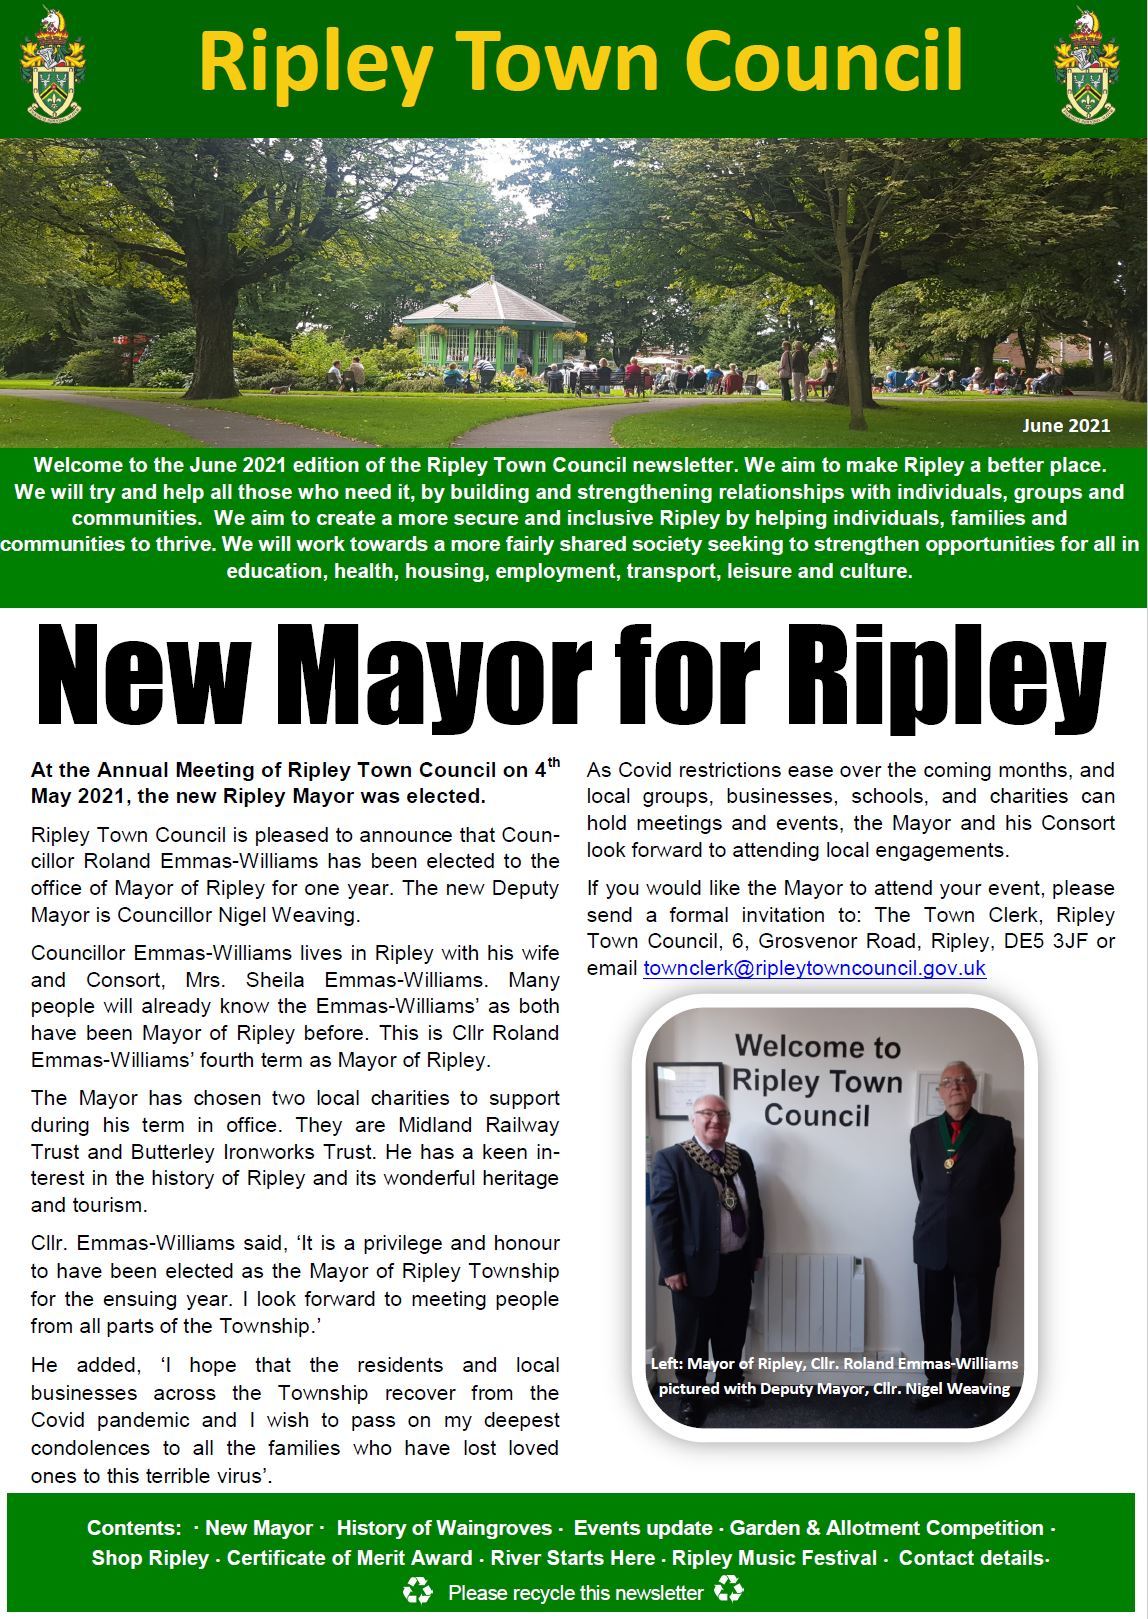 Ripley Town Council June newsletter 2021 New Mayor article photo of Mayor and Deputy Mayor